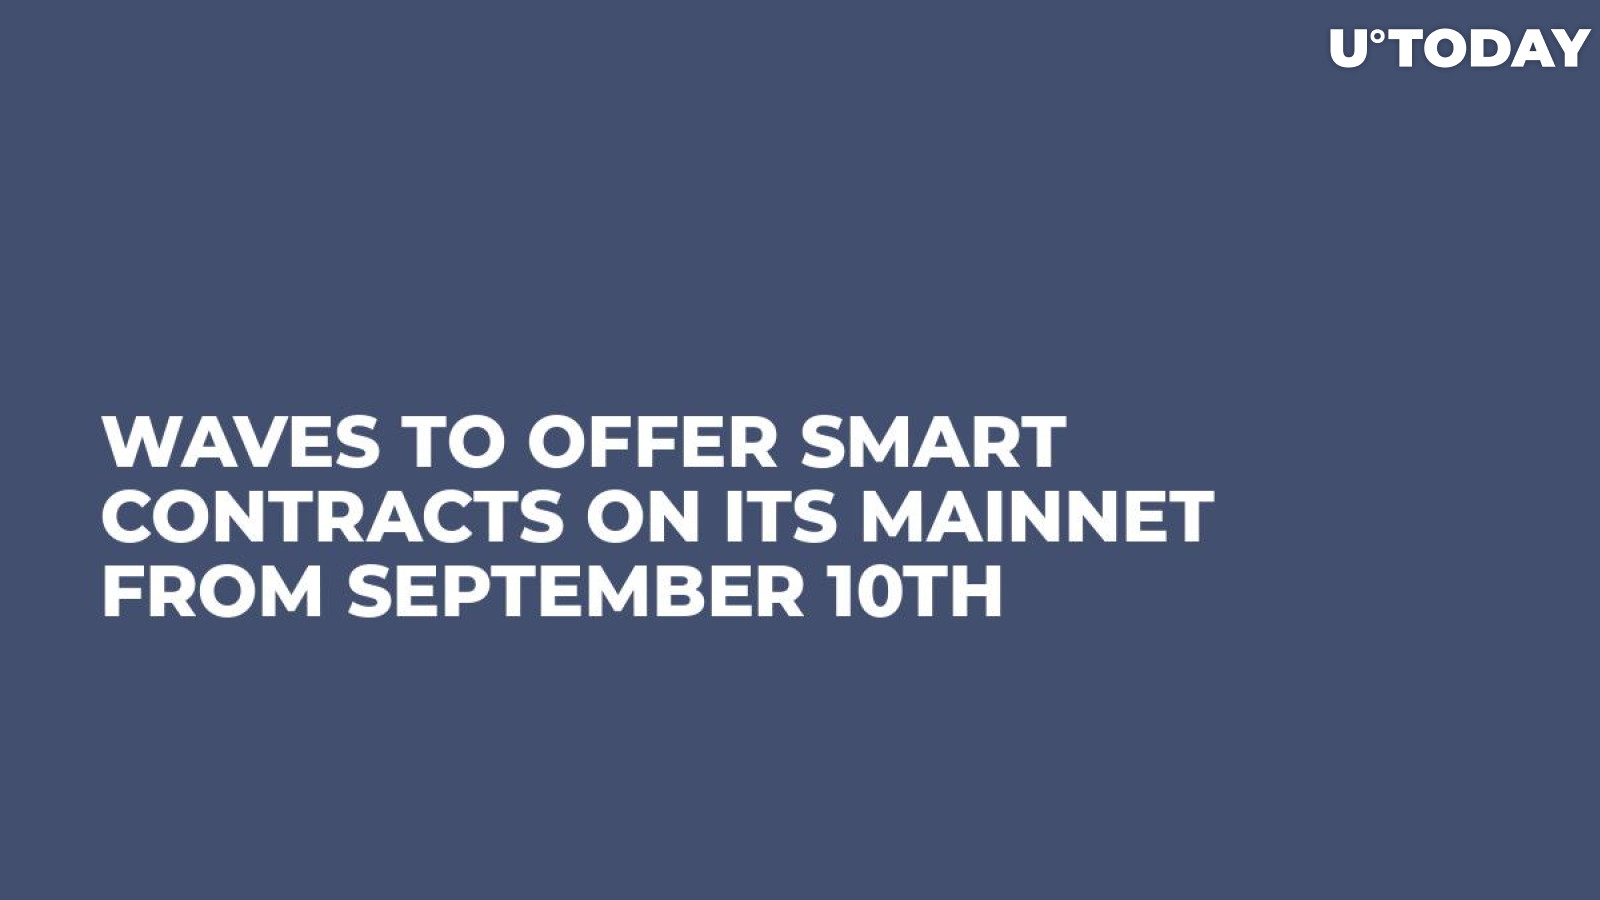 Waves to Offer Smart Contracts on Its Mainnet From September 10th